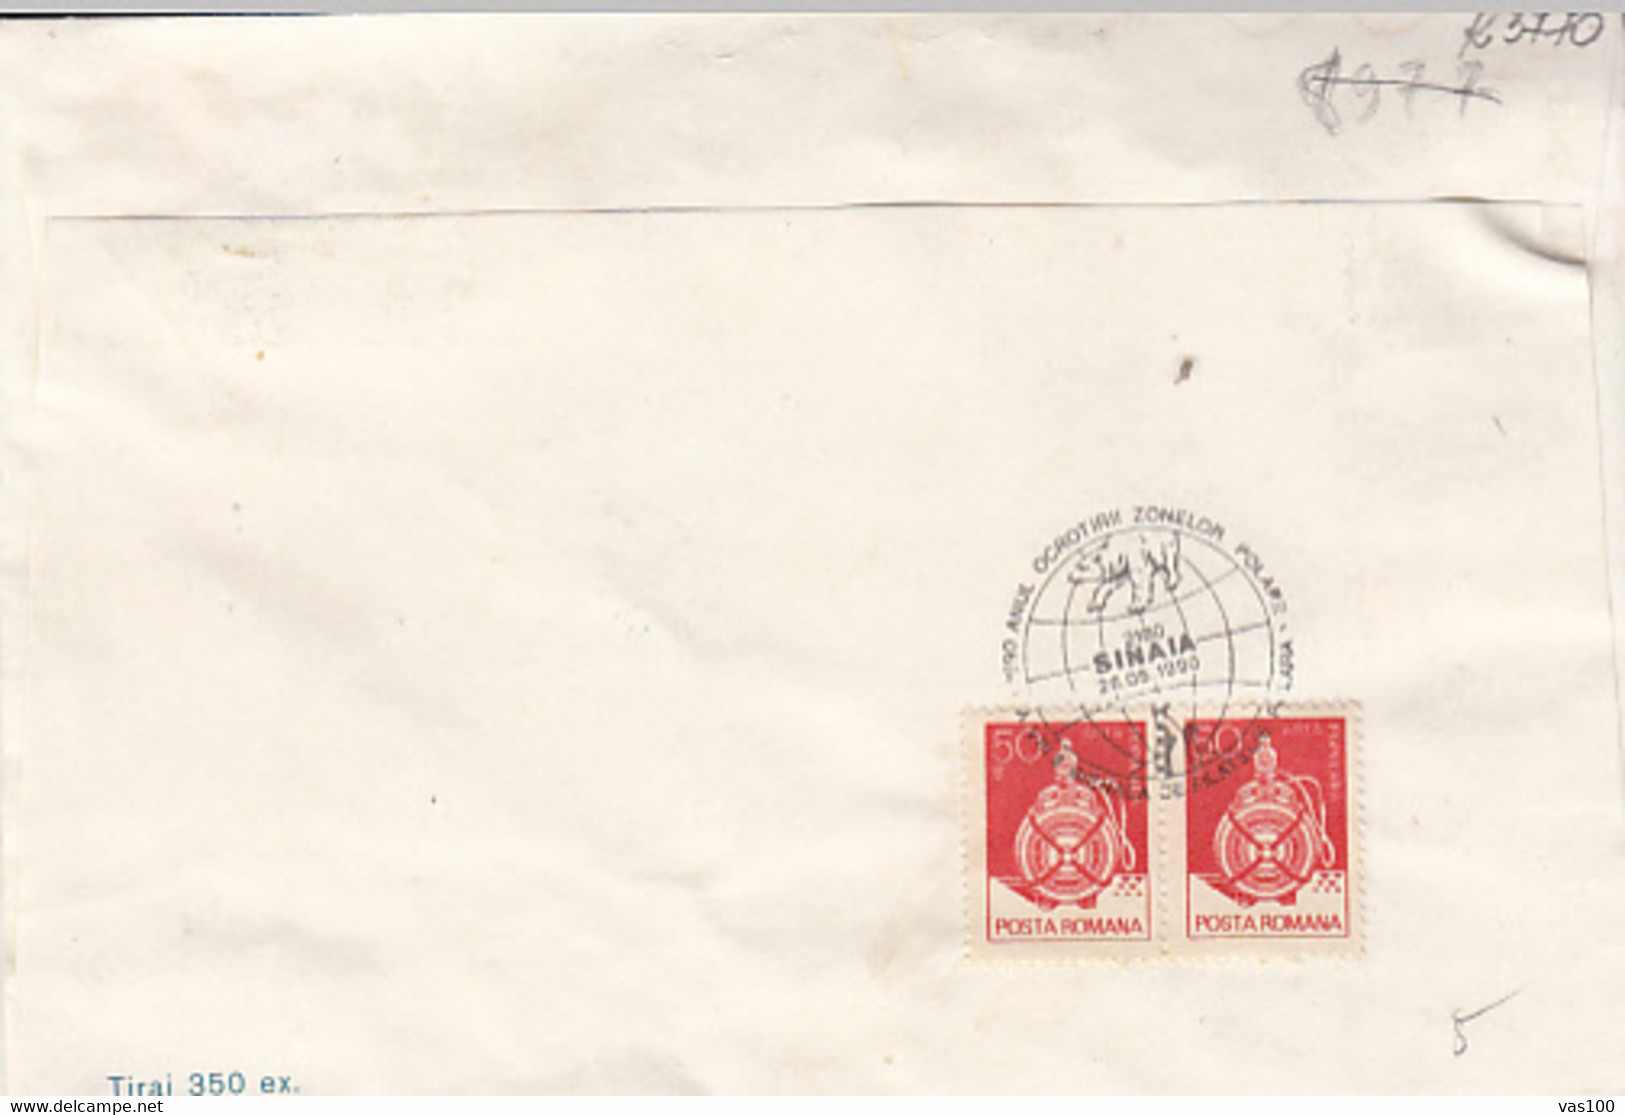 POLAR PHILATELY, YEAR OF PROTECTION OF POLAR REGIONS, SPECIAL COVER, 1990, ROMANIA - Preserve The Polar Regions And Glaciers